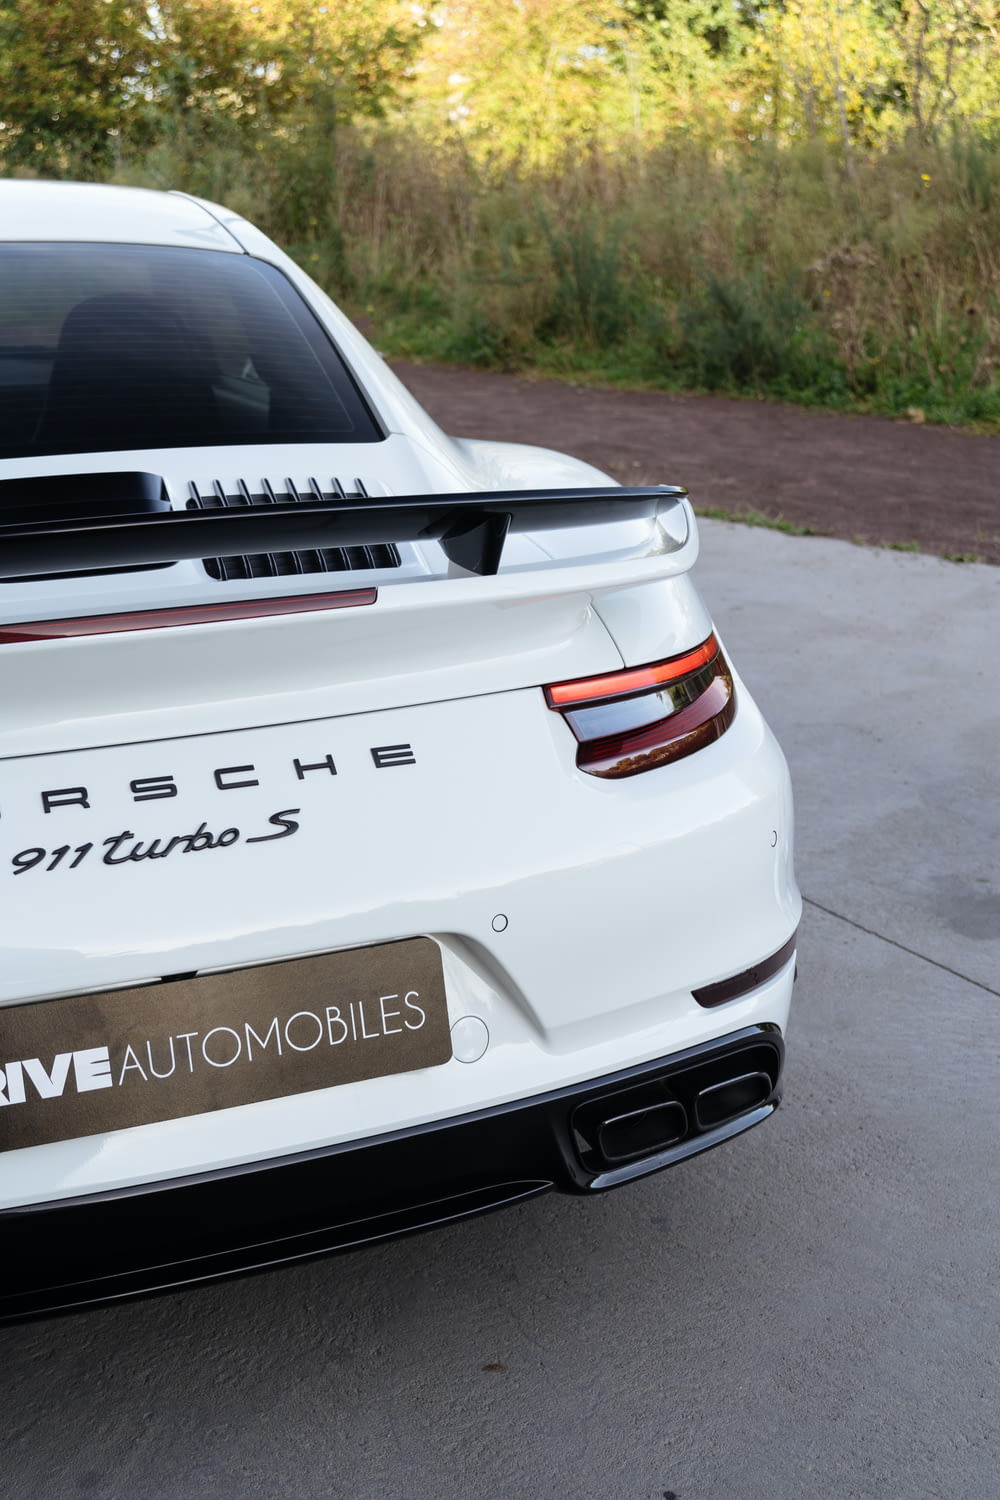 the back of a white porsche car parked in a driveway